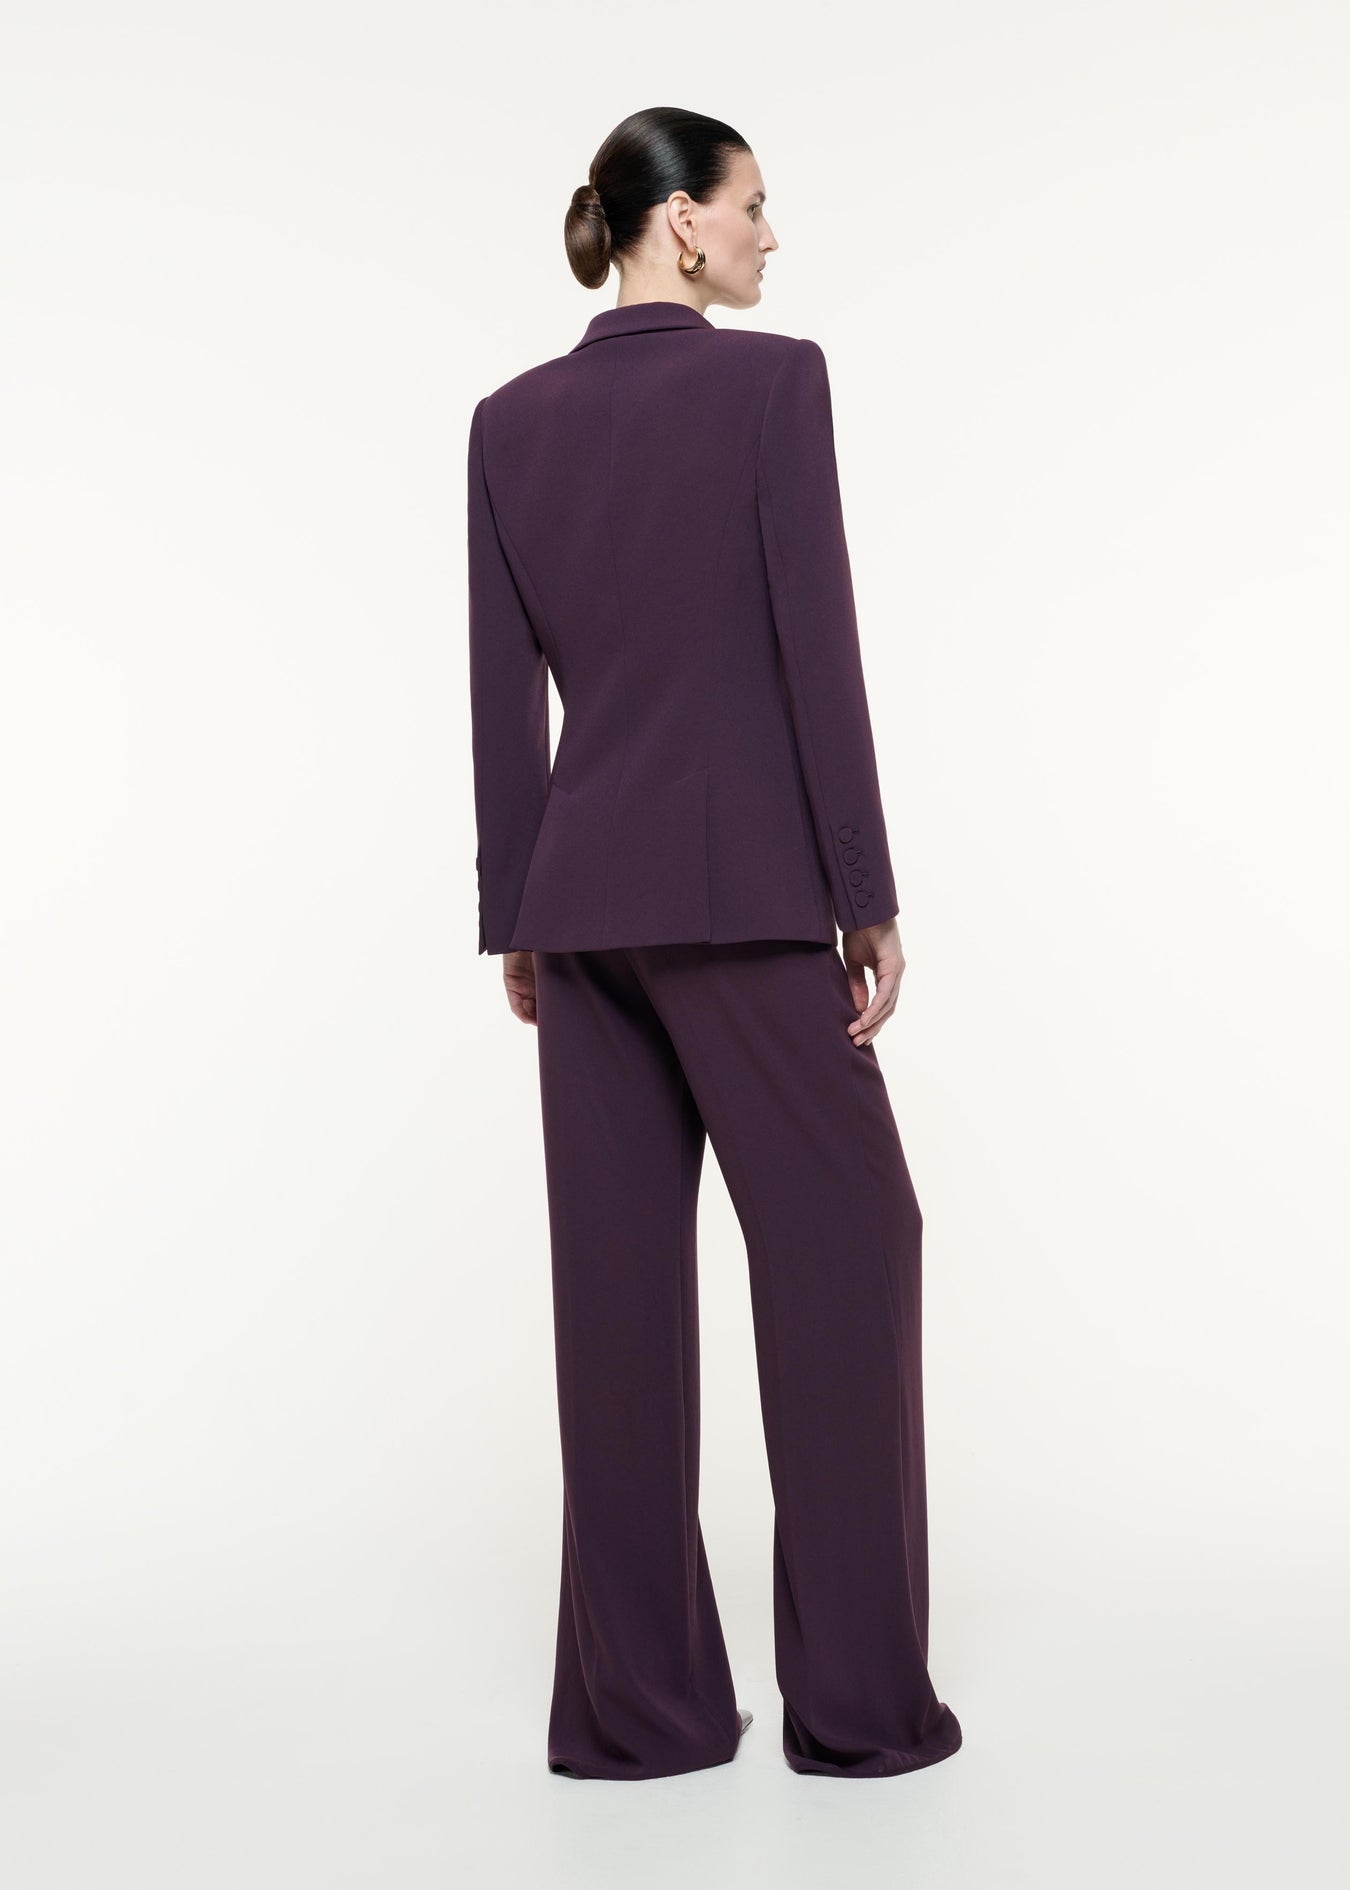 A back view image of a model wearing the Satin Crepe Jacket in Aubergine